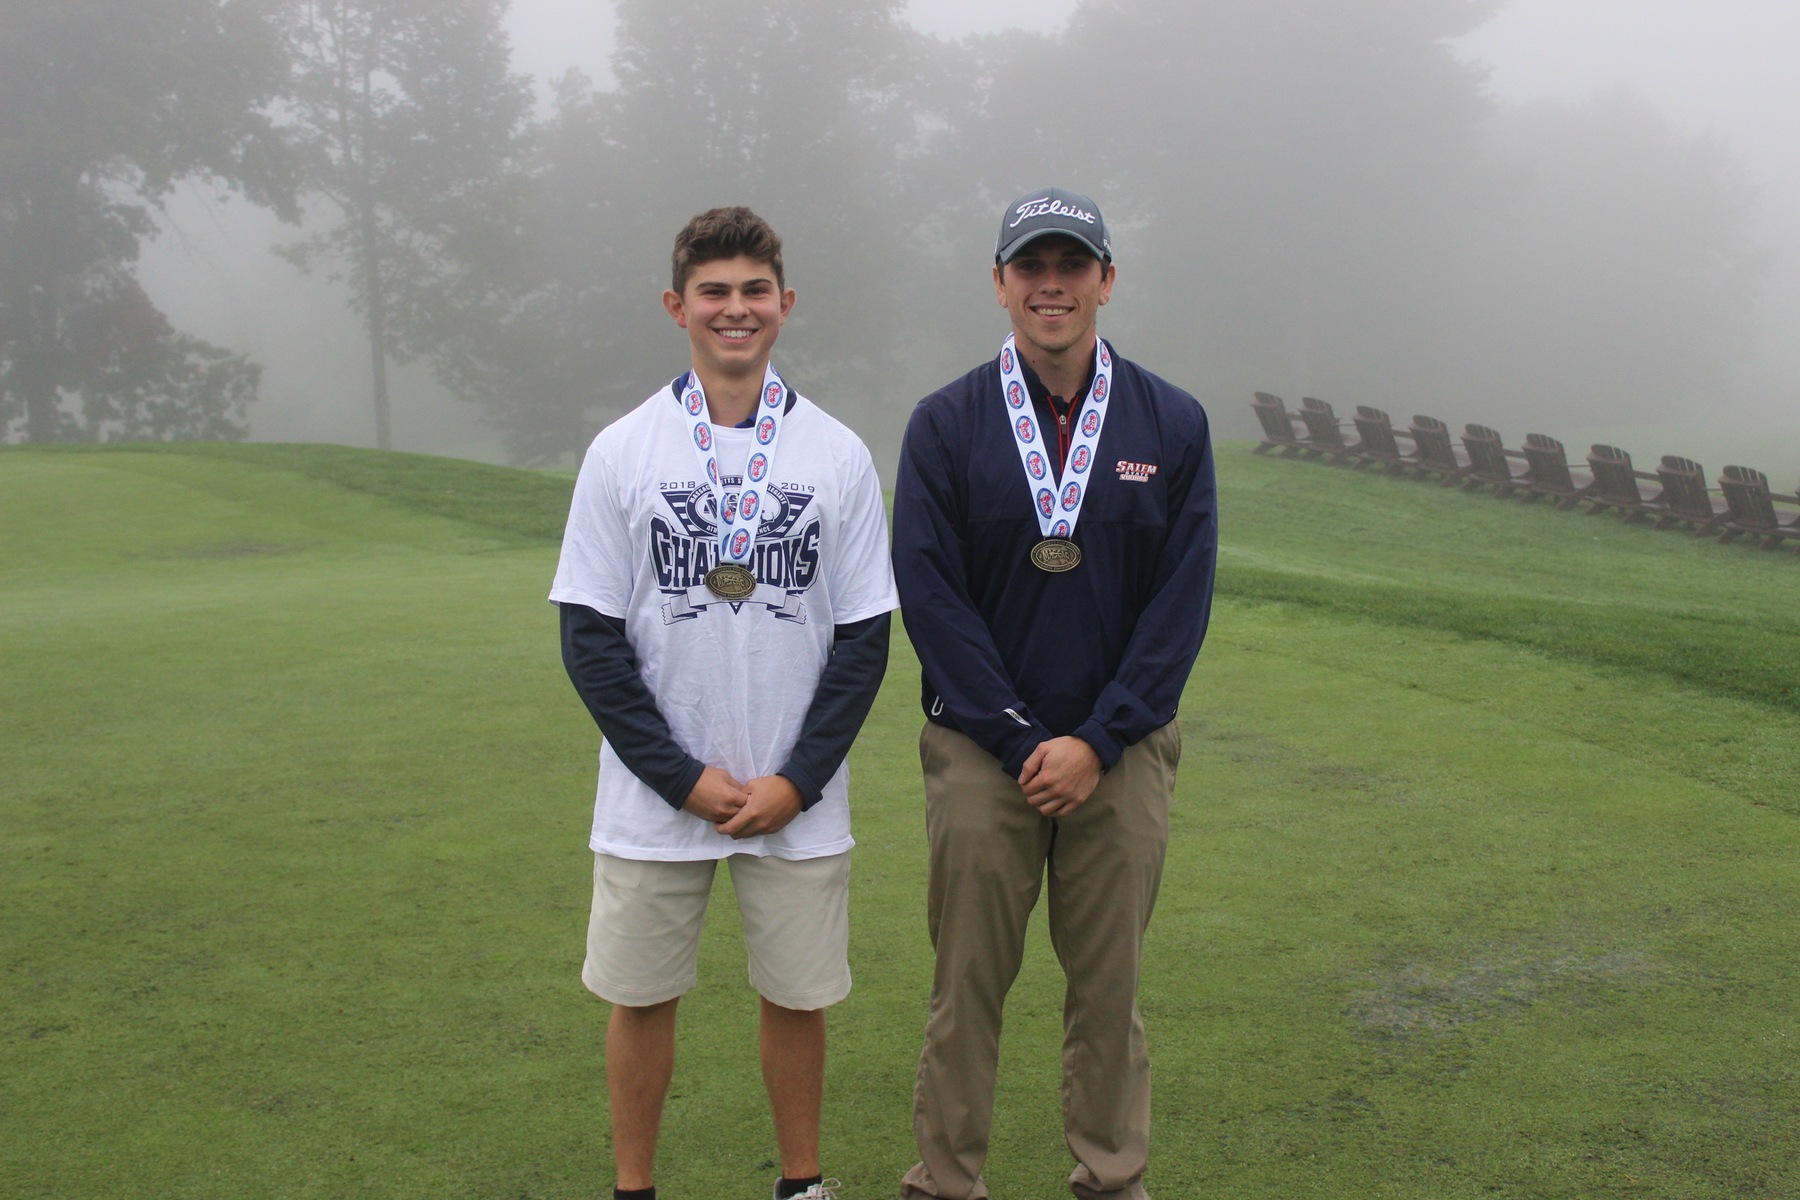 Powers Earns Co-Medalist Honors at 2018 MASCAC Championship, Vikings Finish Runner-Up